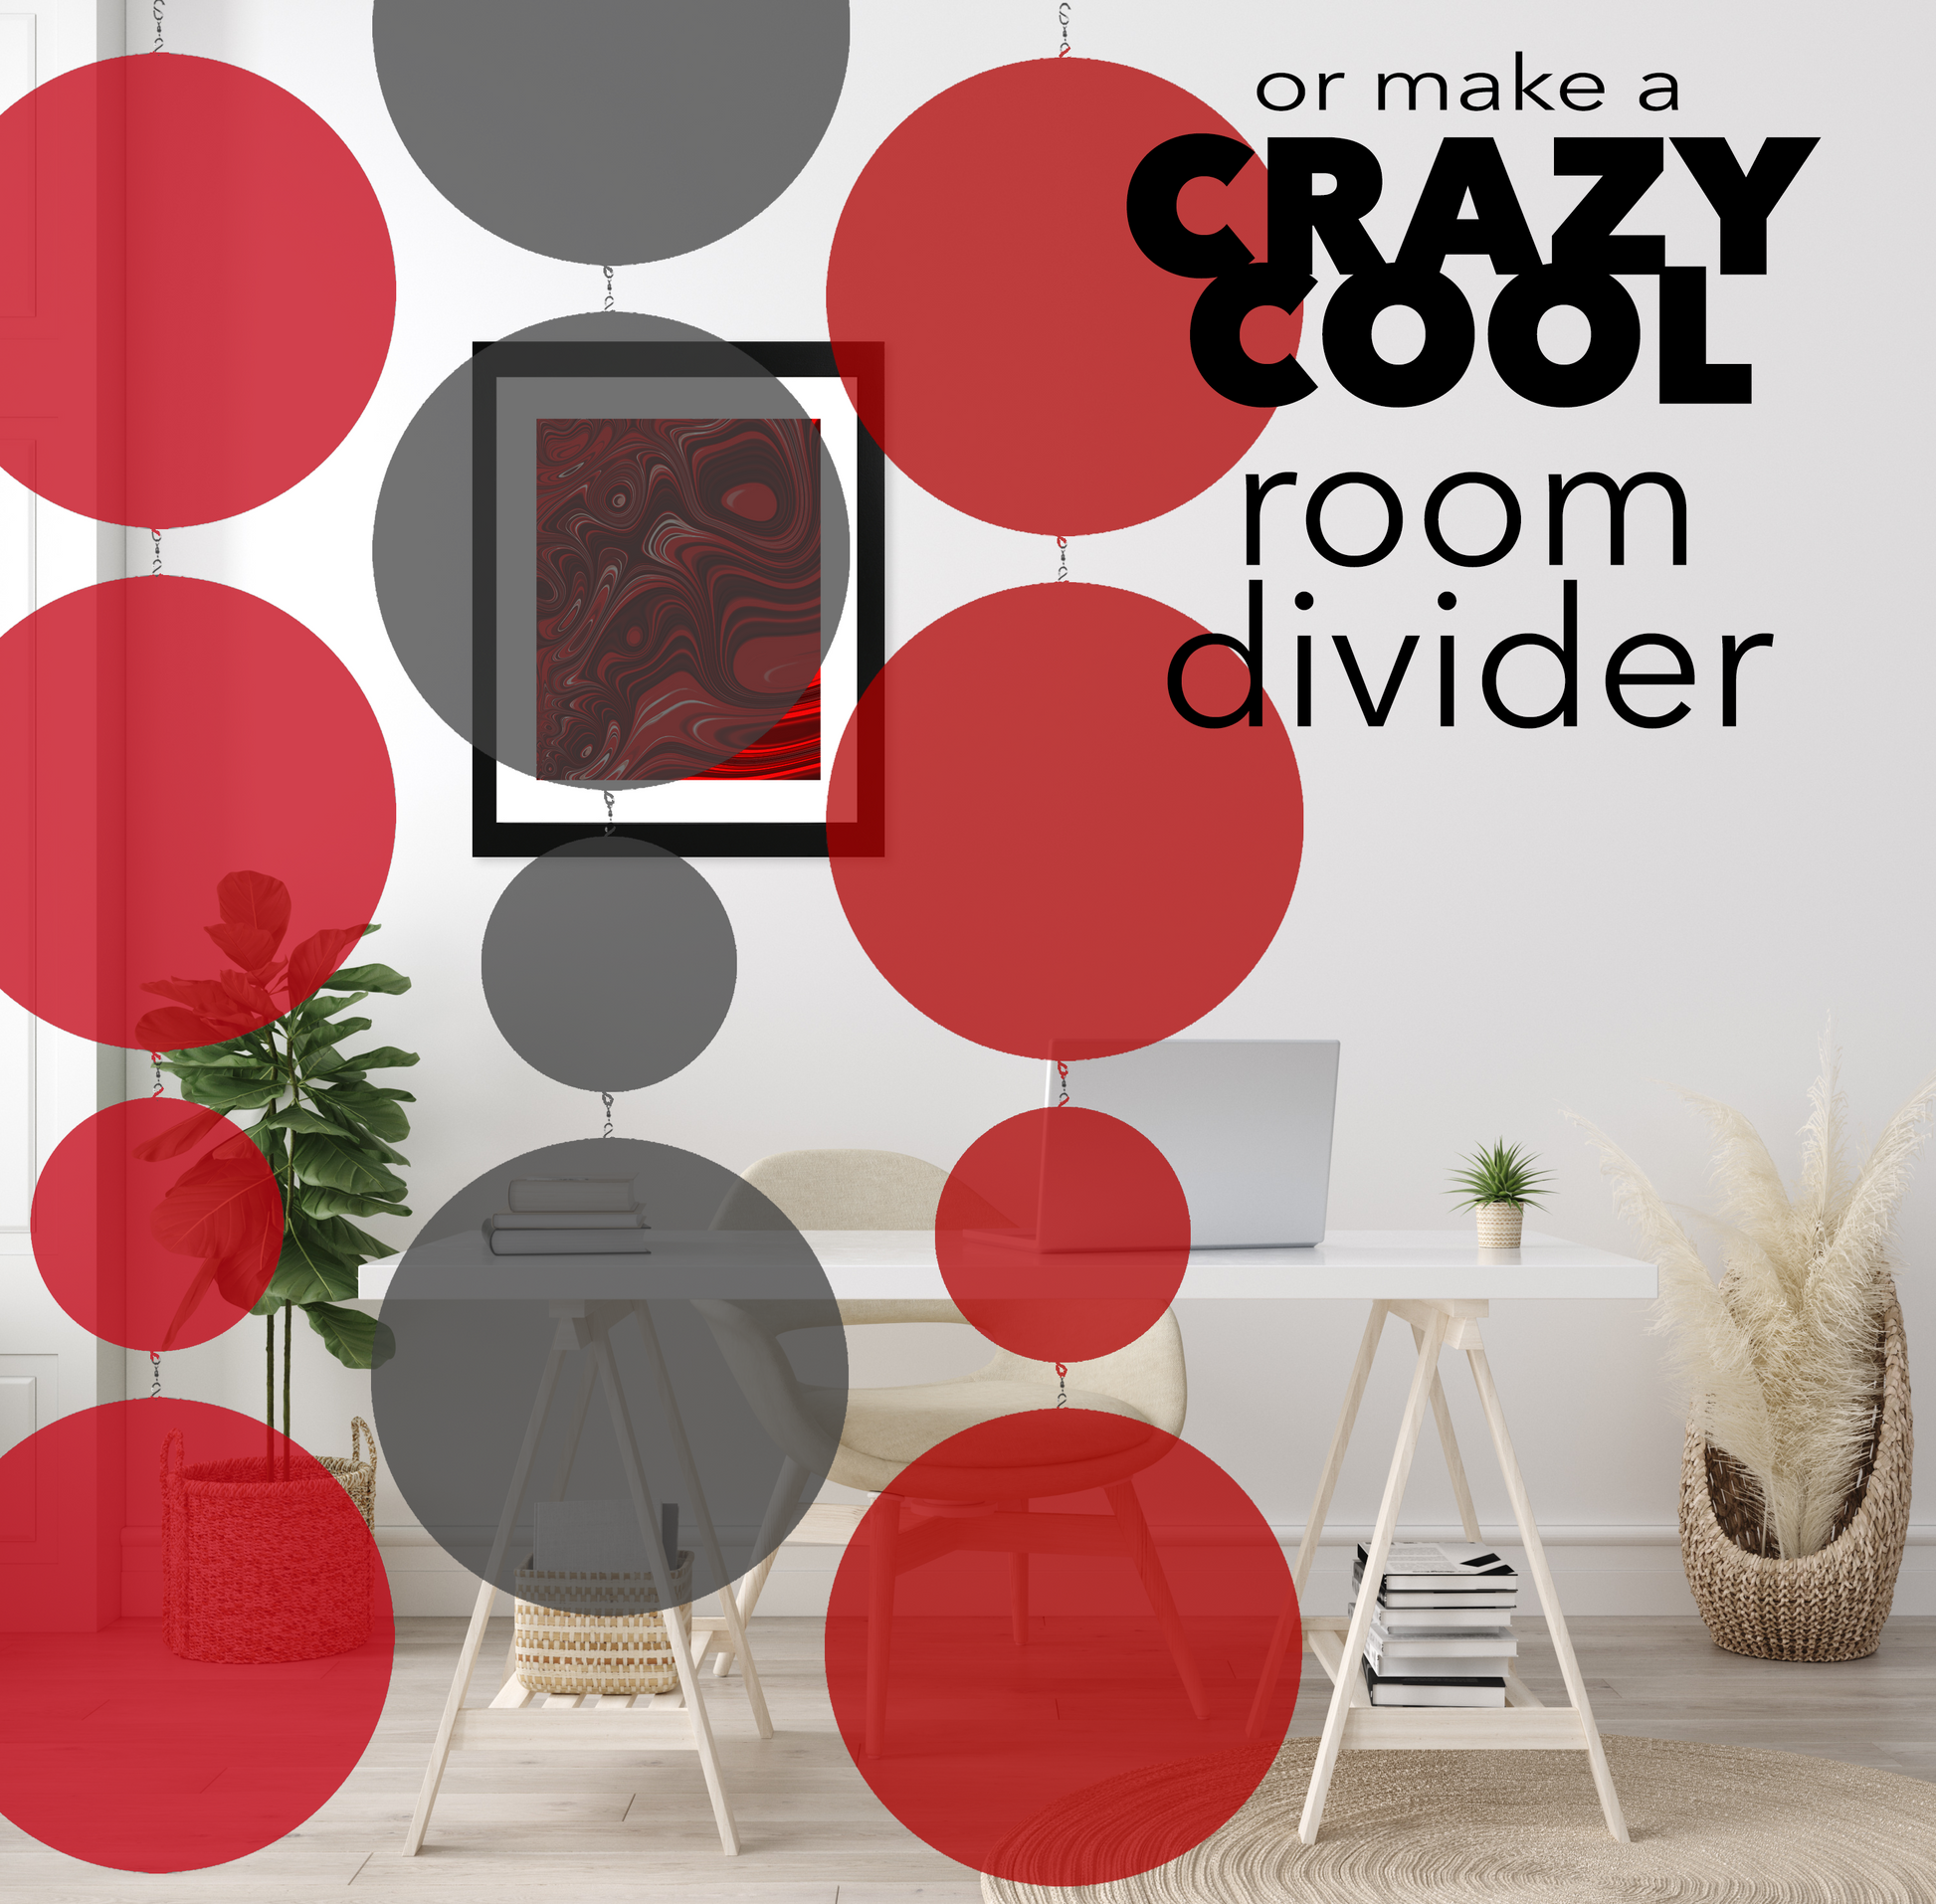 Home Office with desk, computer, framed abstract art, and XL BOLD AF Hanging Modern Art Mobile Sculpture as a CRAZY COOL Room Divider - unlike any in the world - in clear transparent red acrylic by AtomicMobiles.com